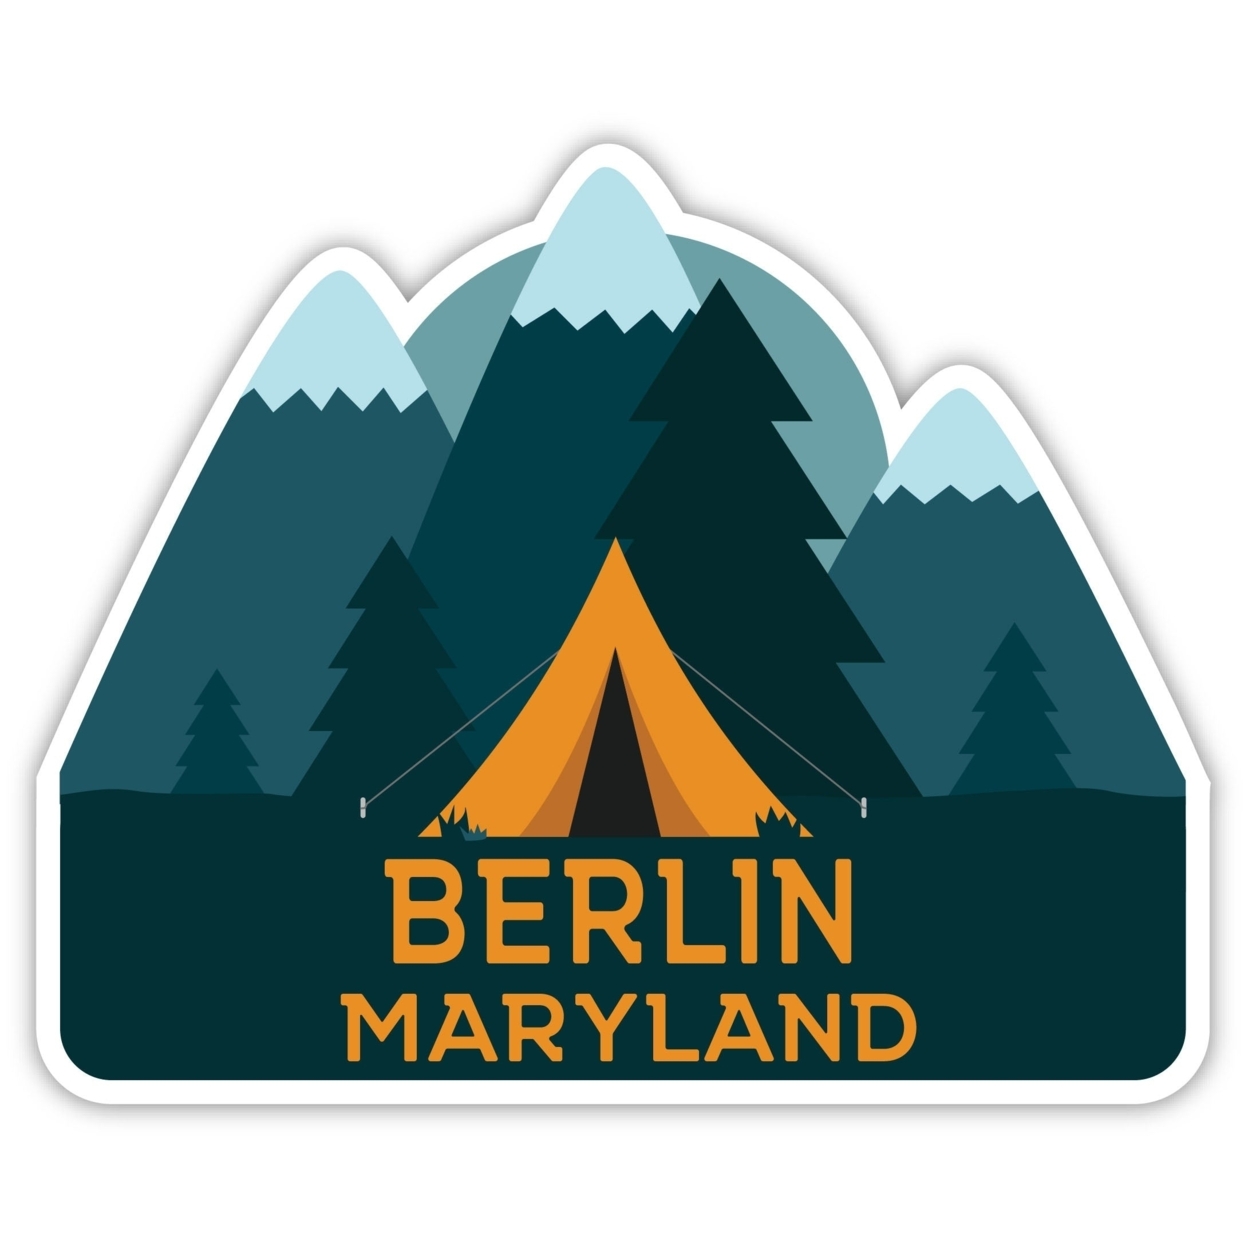 Berlin Maryland Souvenir Decorative Stickers (Choose Theme And Size) - Single Unit, 4-Inch, Tent